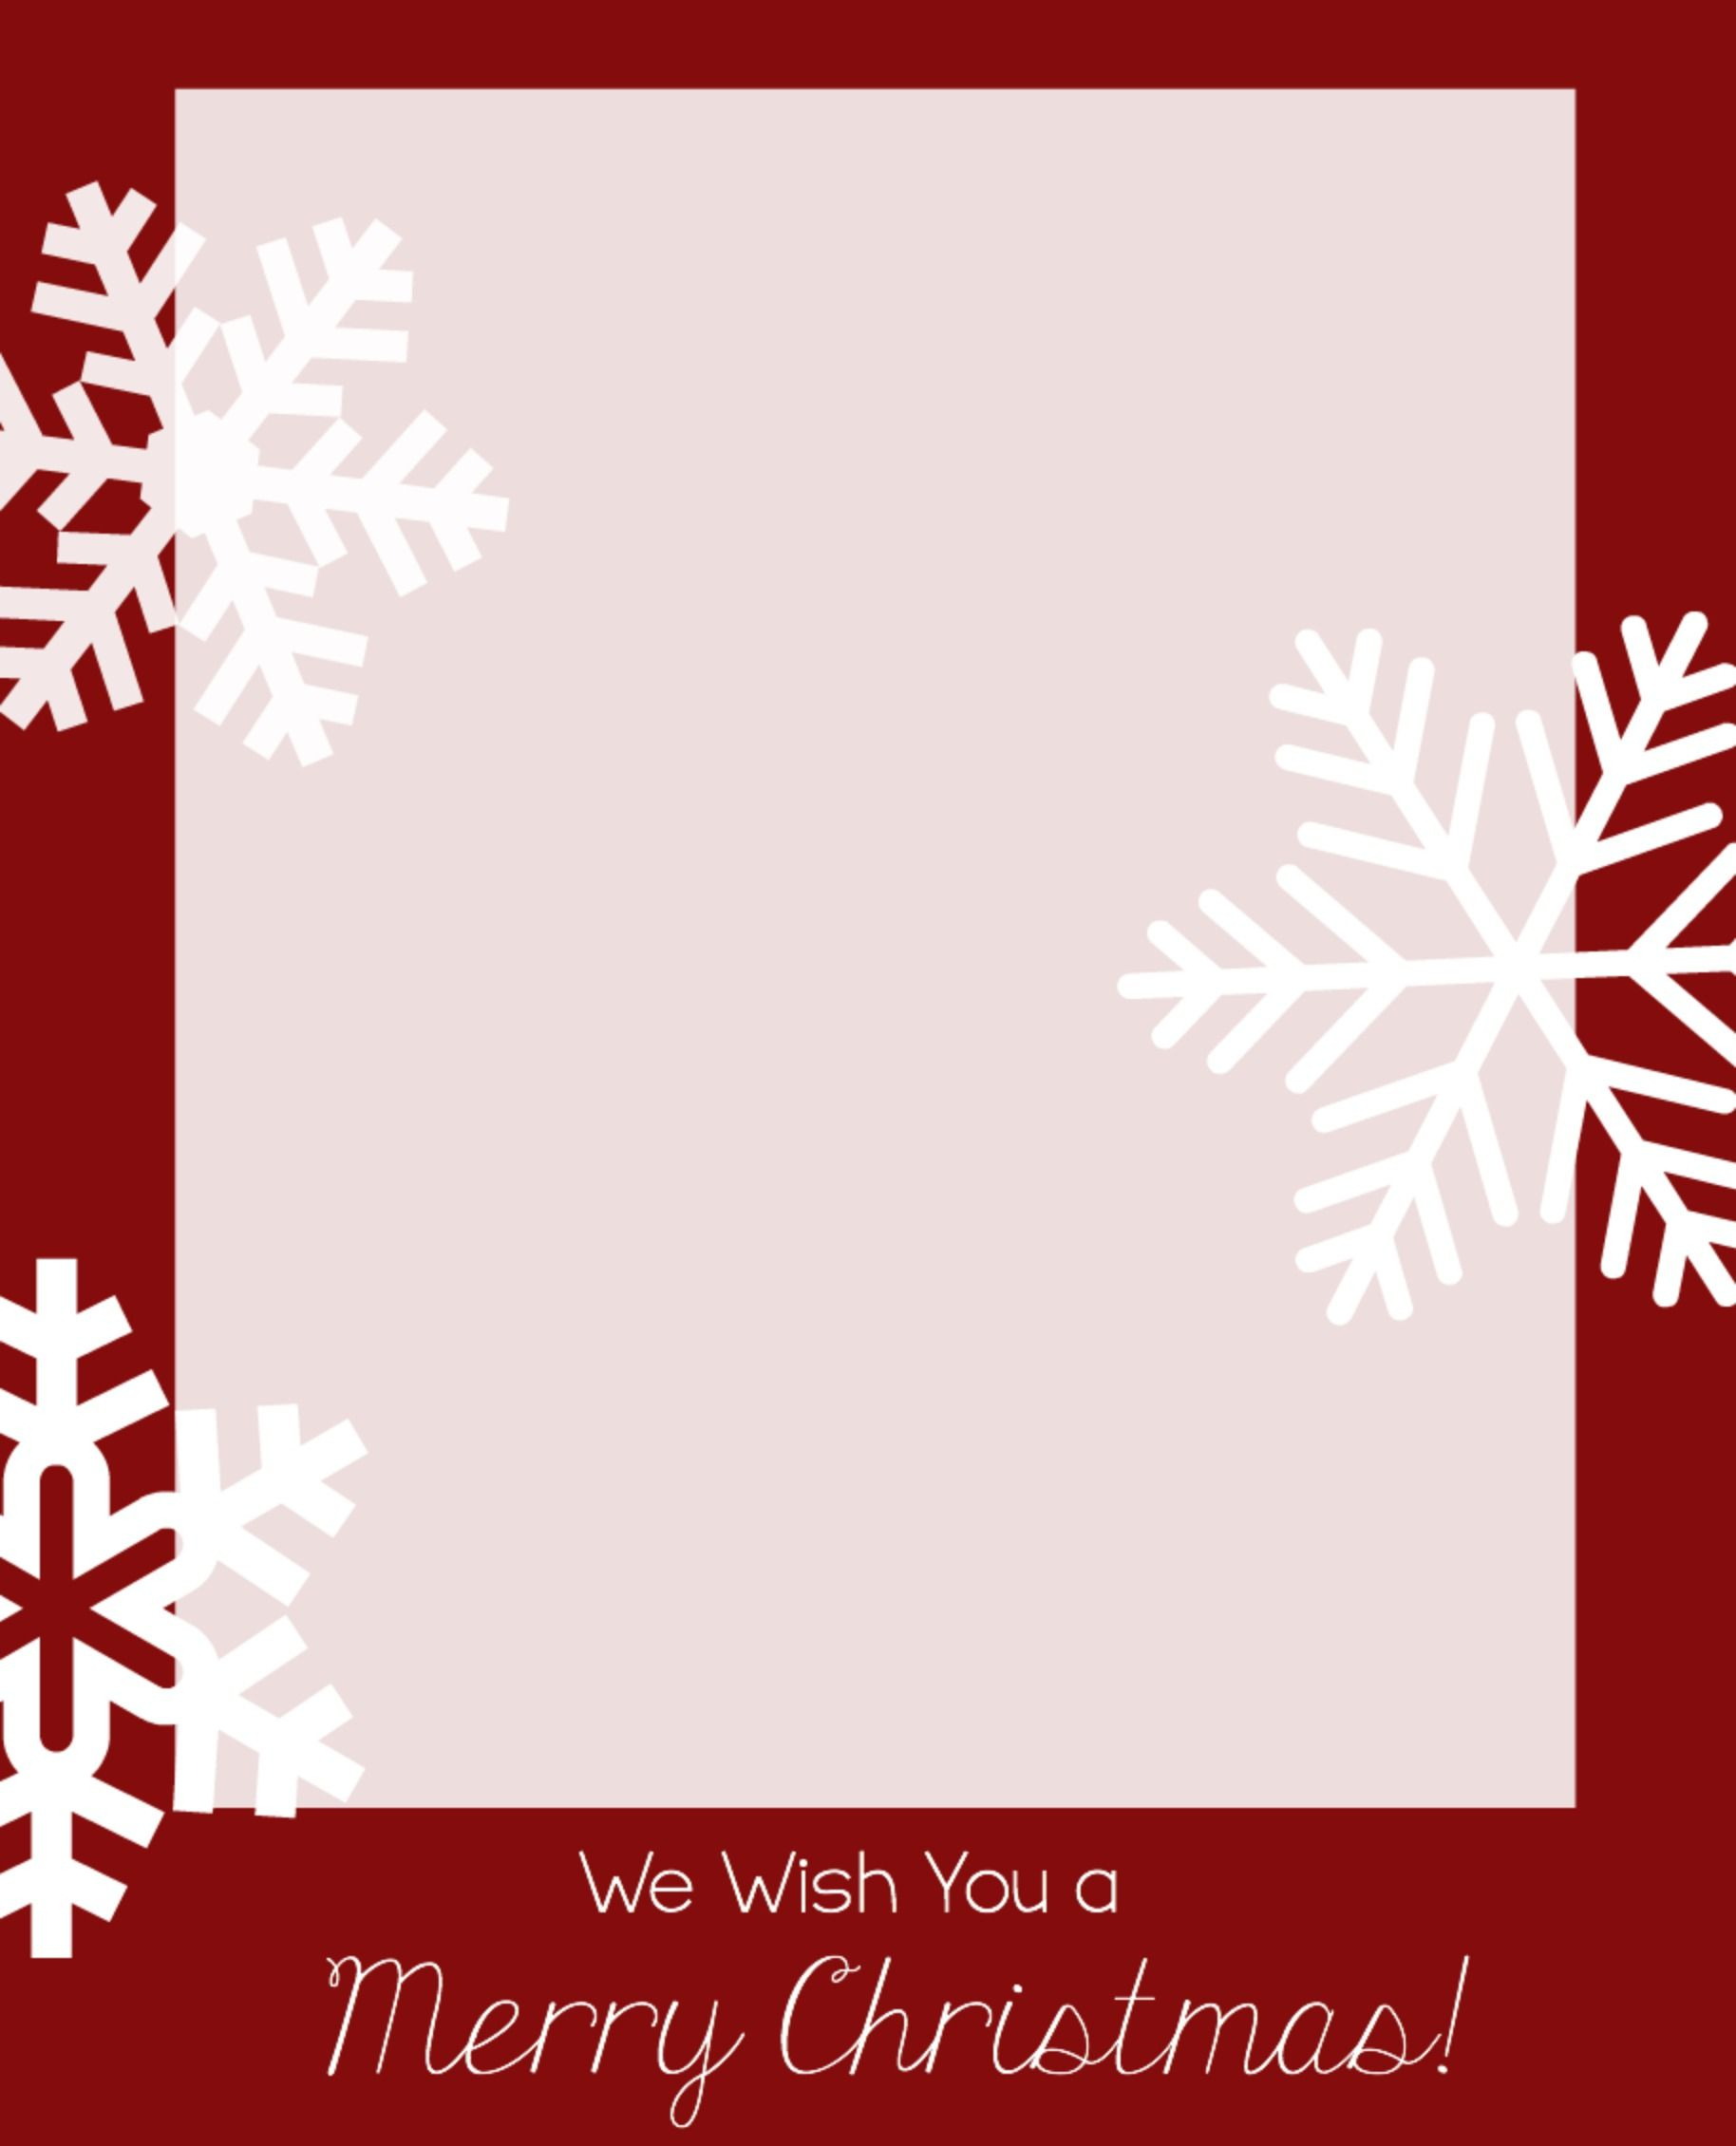 Free Christmas Card Templates - Crazy Little Projects | Christmas within Free Online Printable Christmas Cards